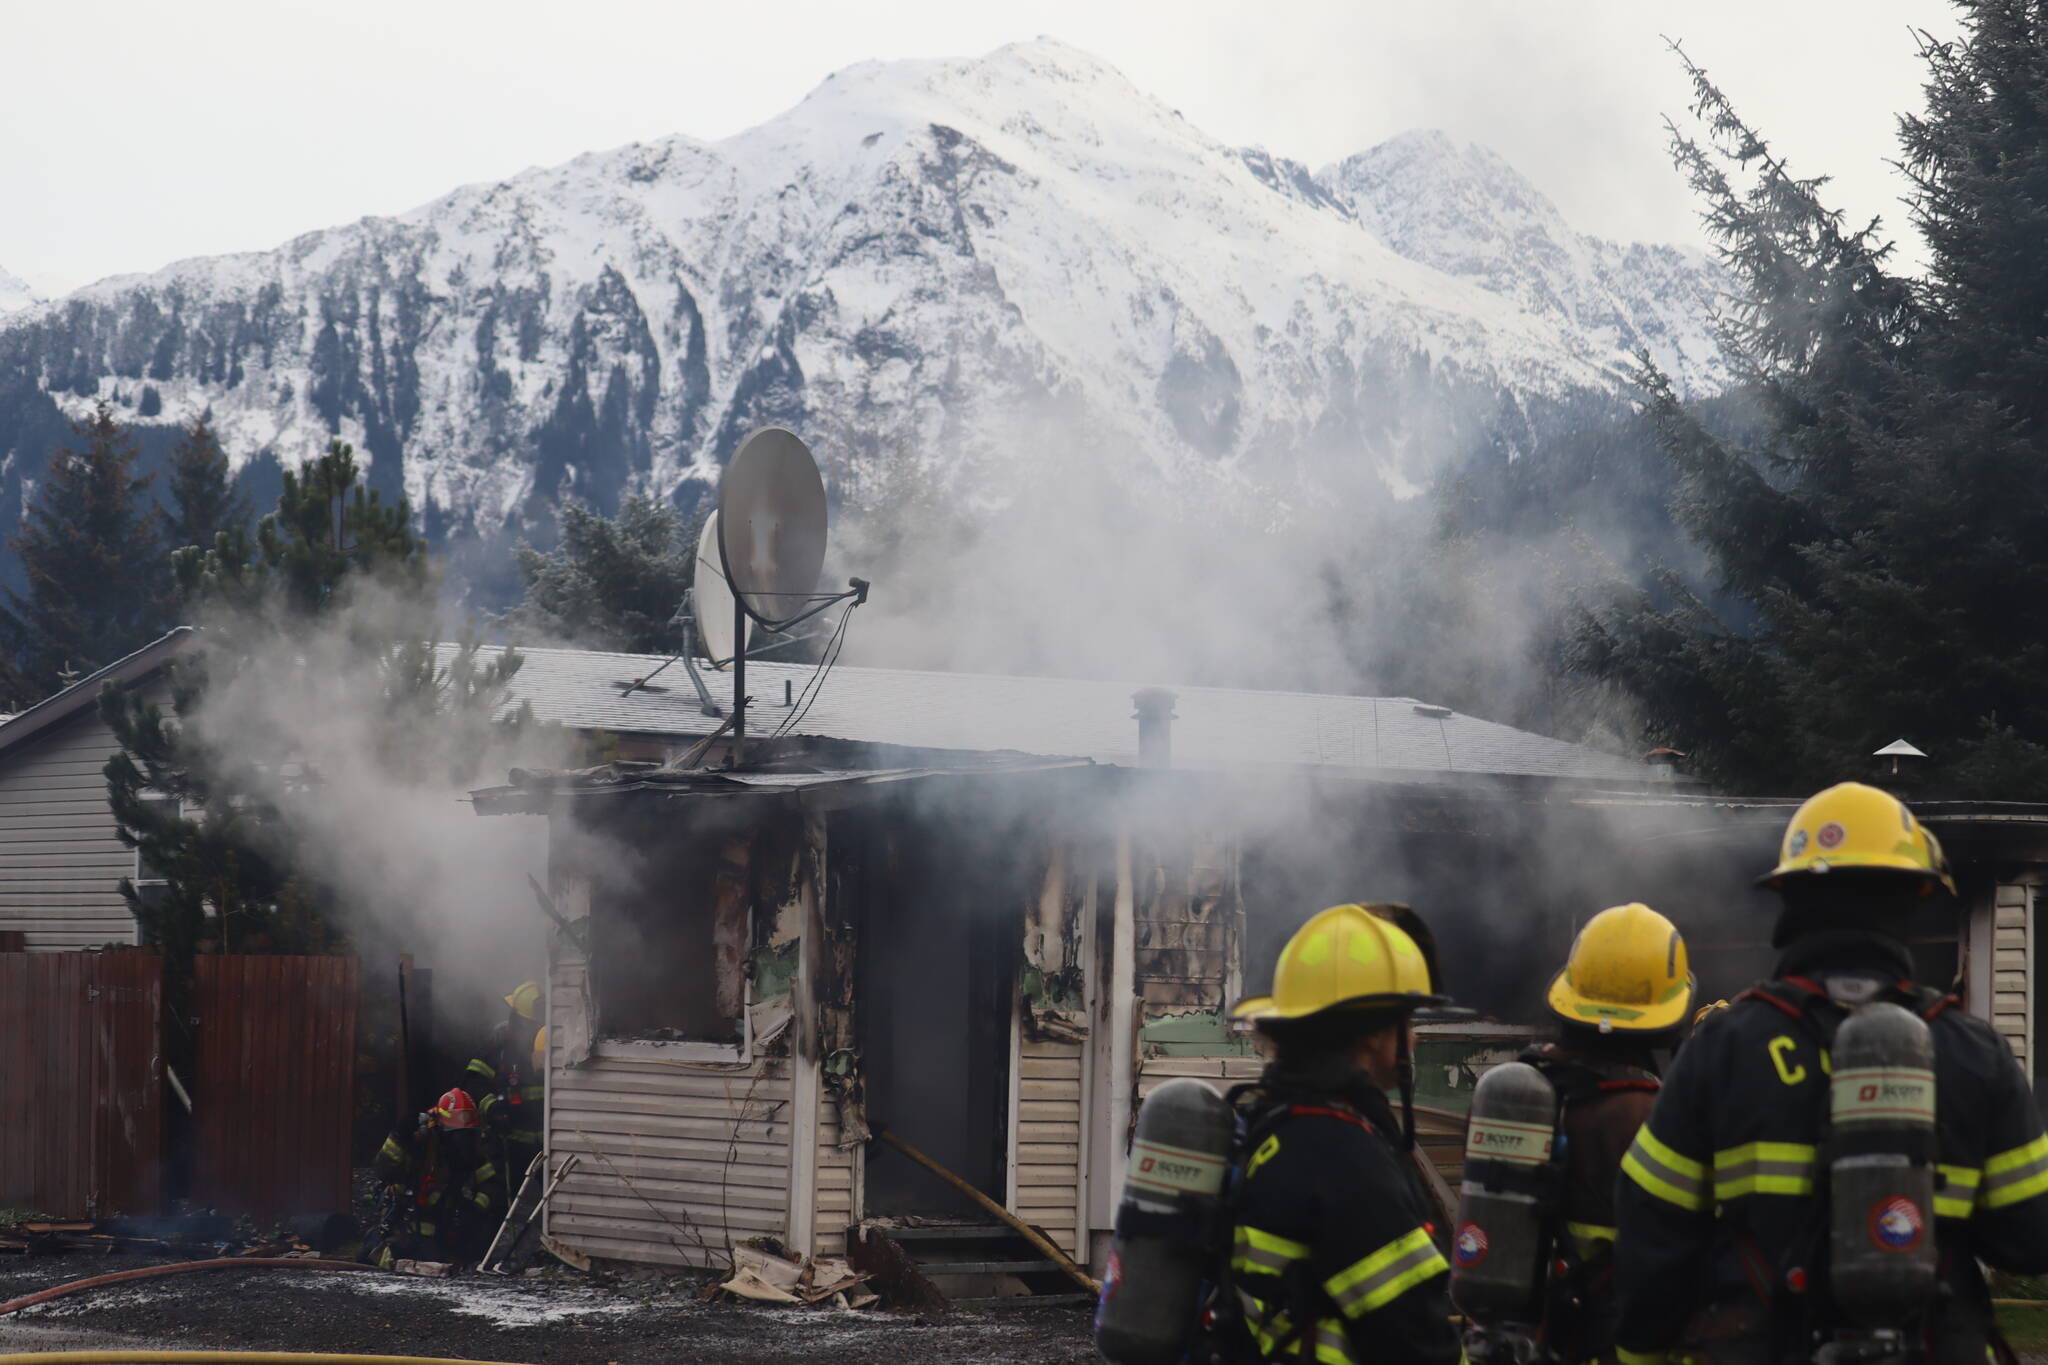 CCFR responding to a trailer fire at Sprucewood Park in Mendenhall Valley Wednesday morning at approximately 8:30 a.m. No injuries were reported. (Jonson Kuhn / Juneau Empire)